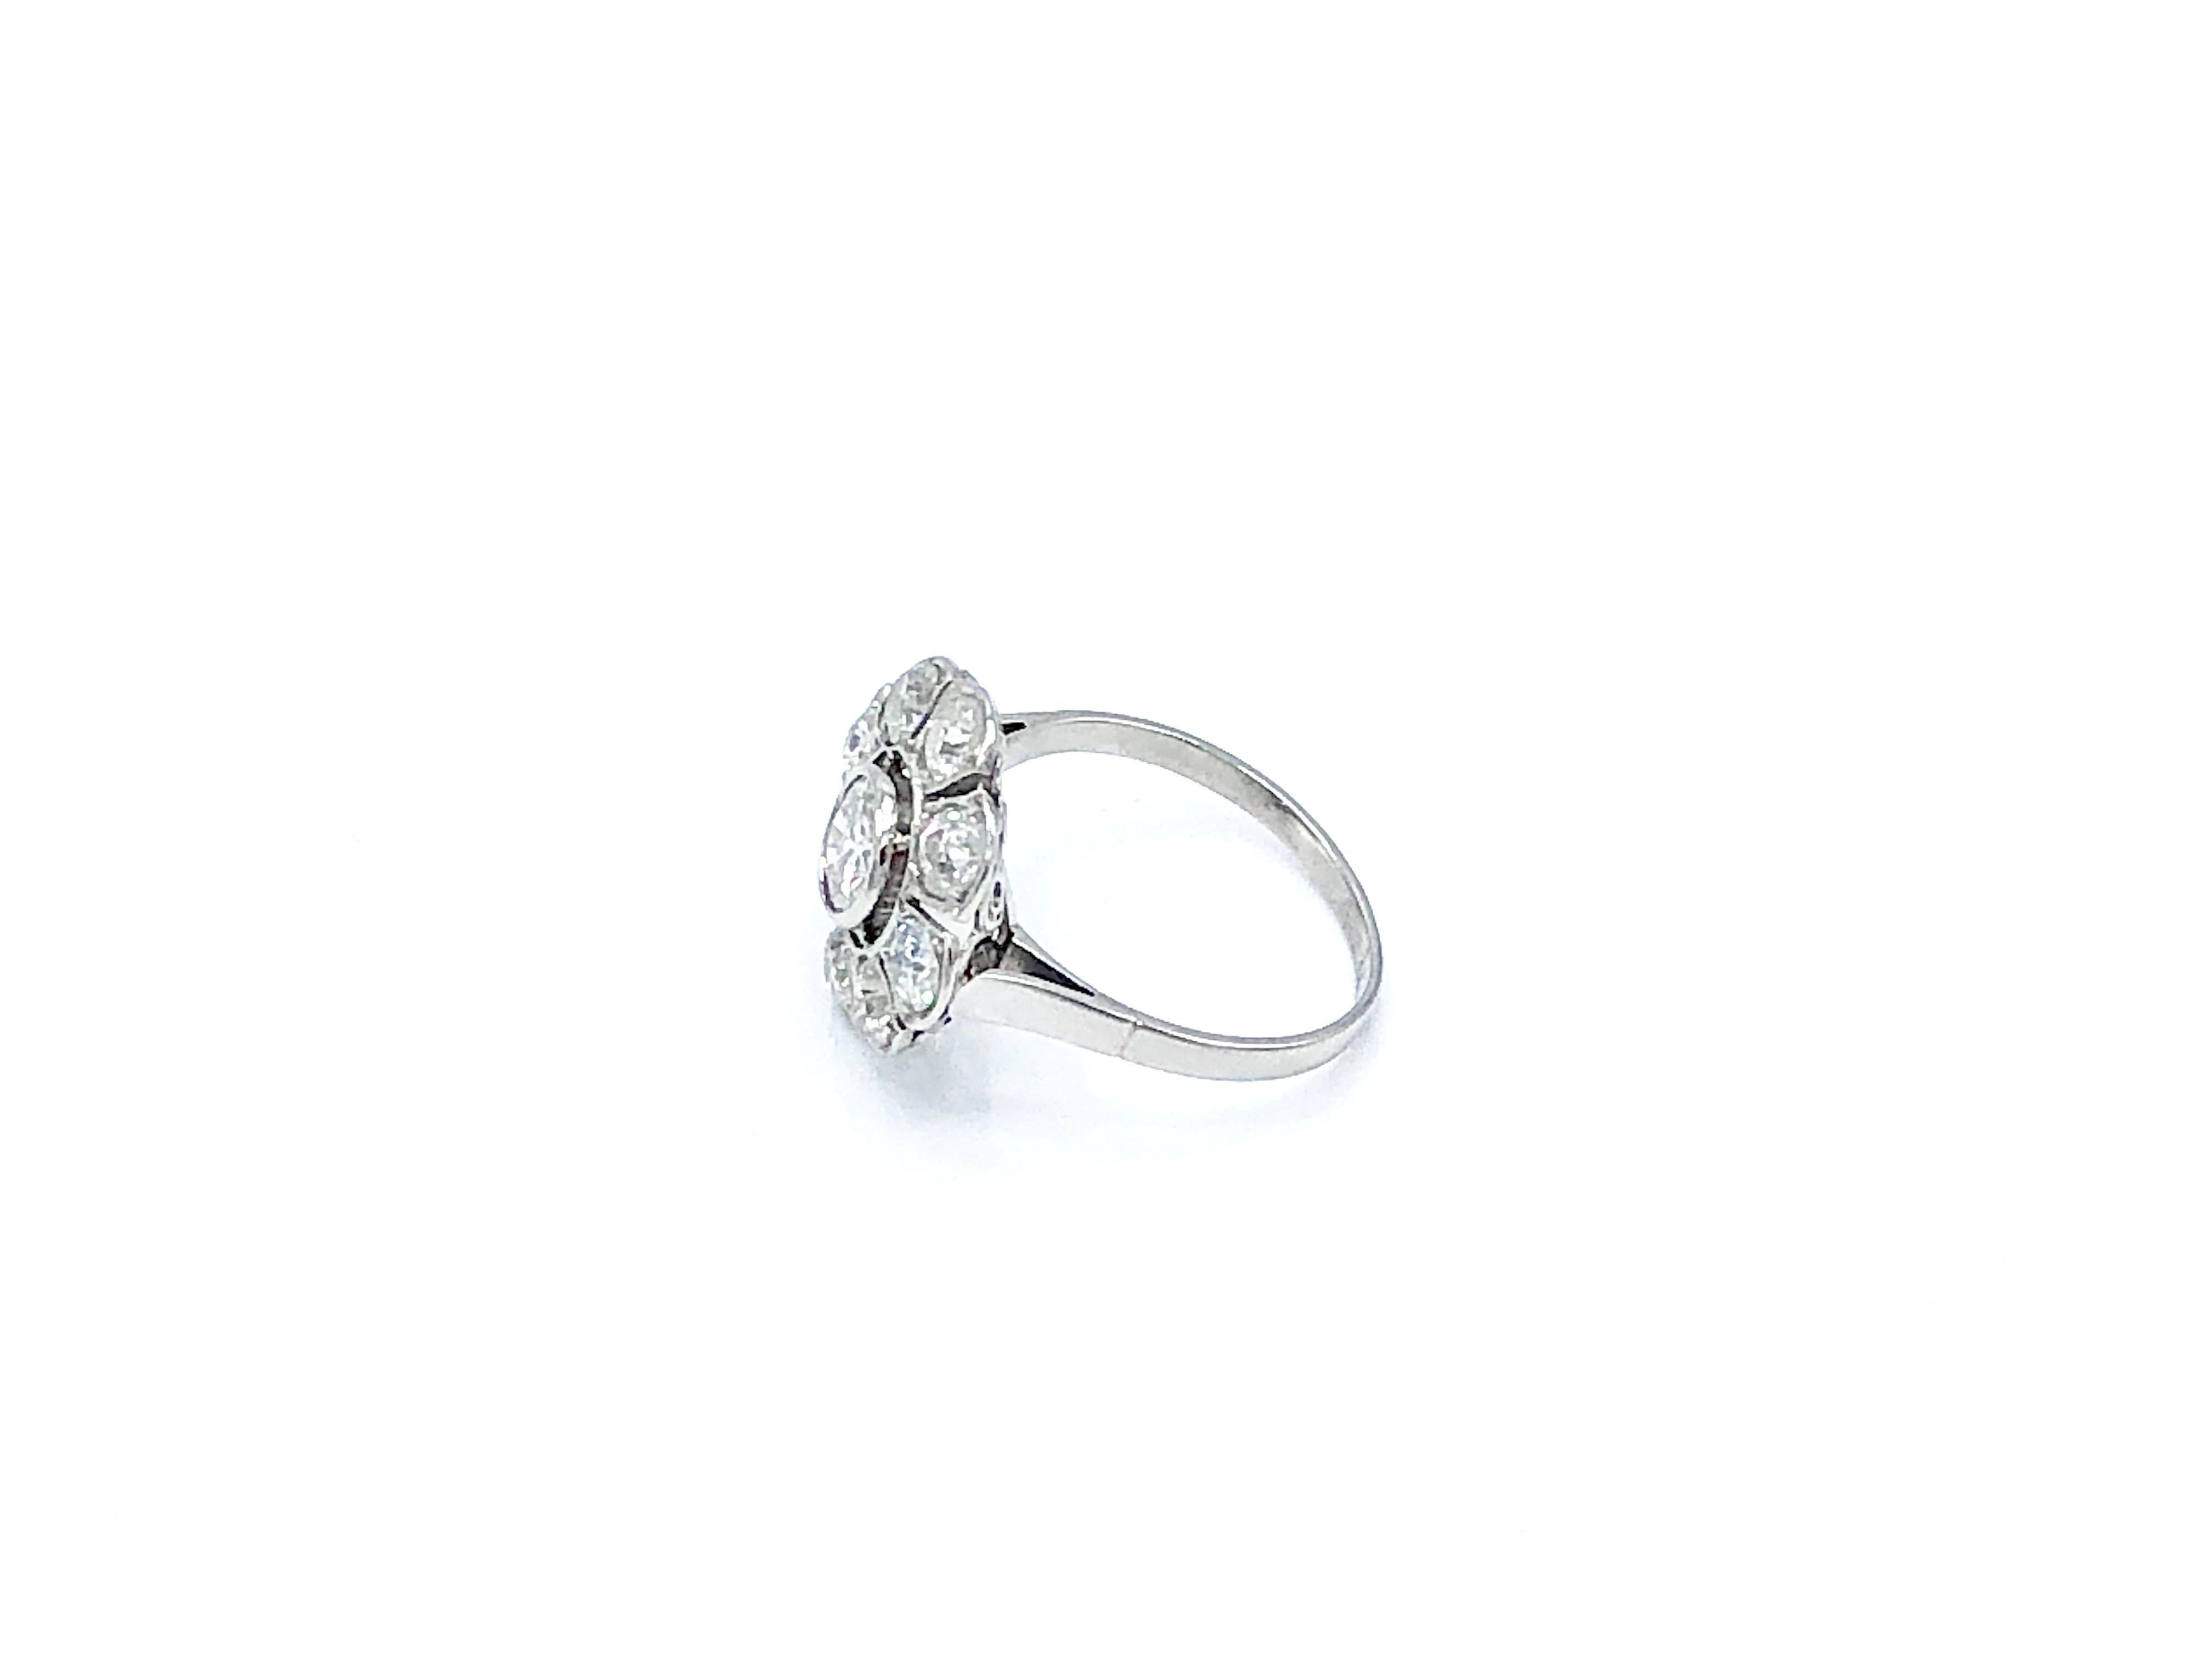 An elegant platinum daisy ring set with approximately 2 .5 ct of diamonds